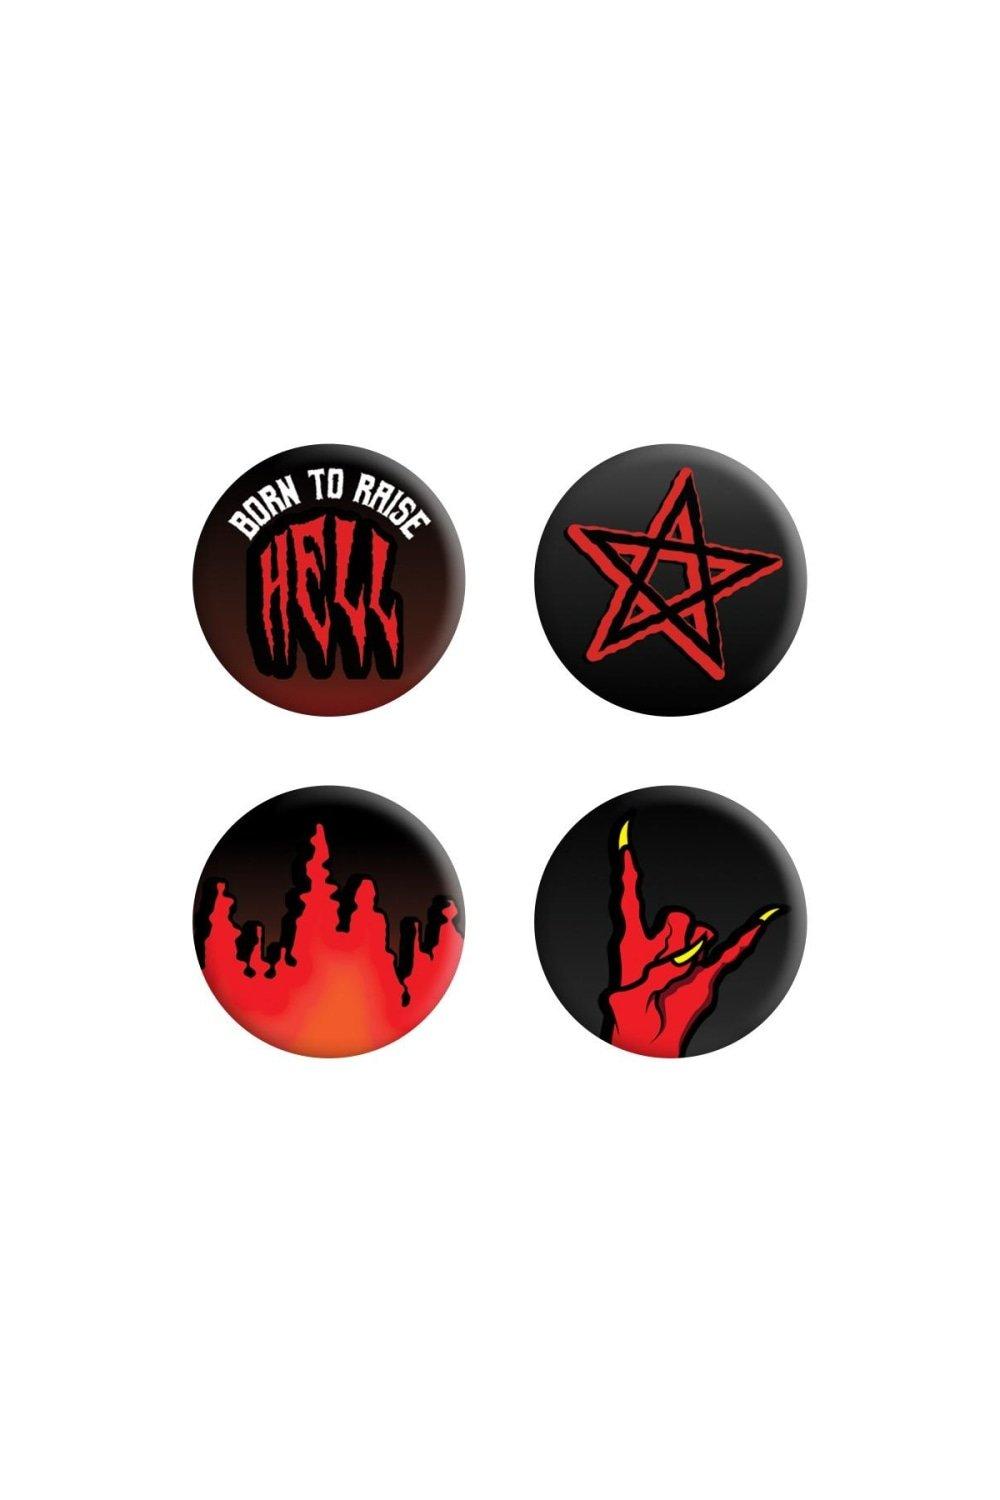 Born To Raise Hell Badge Pack